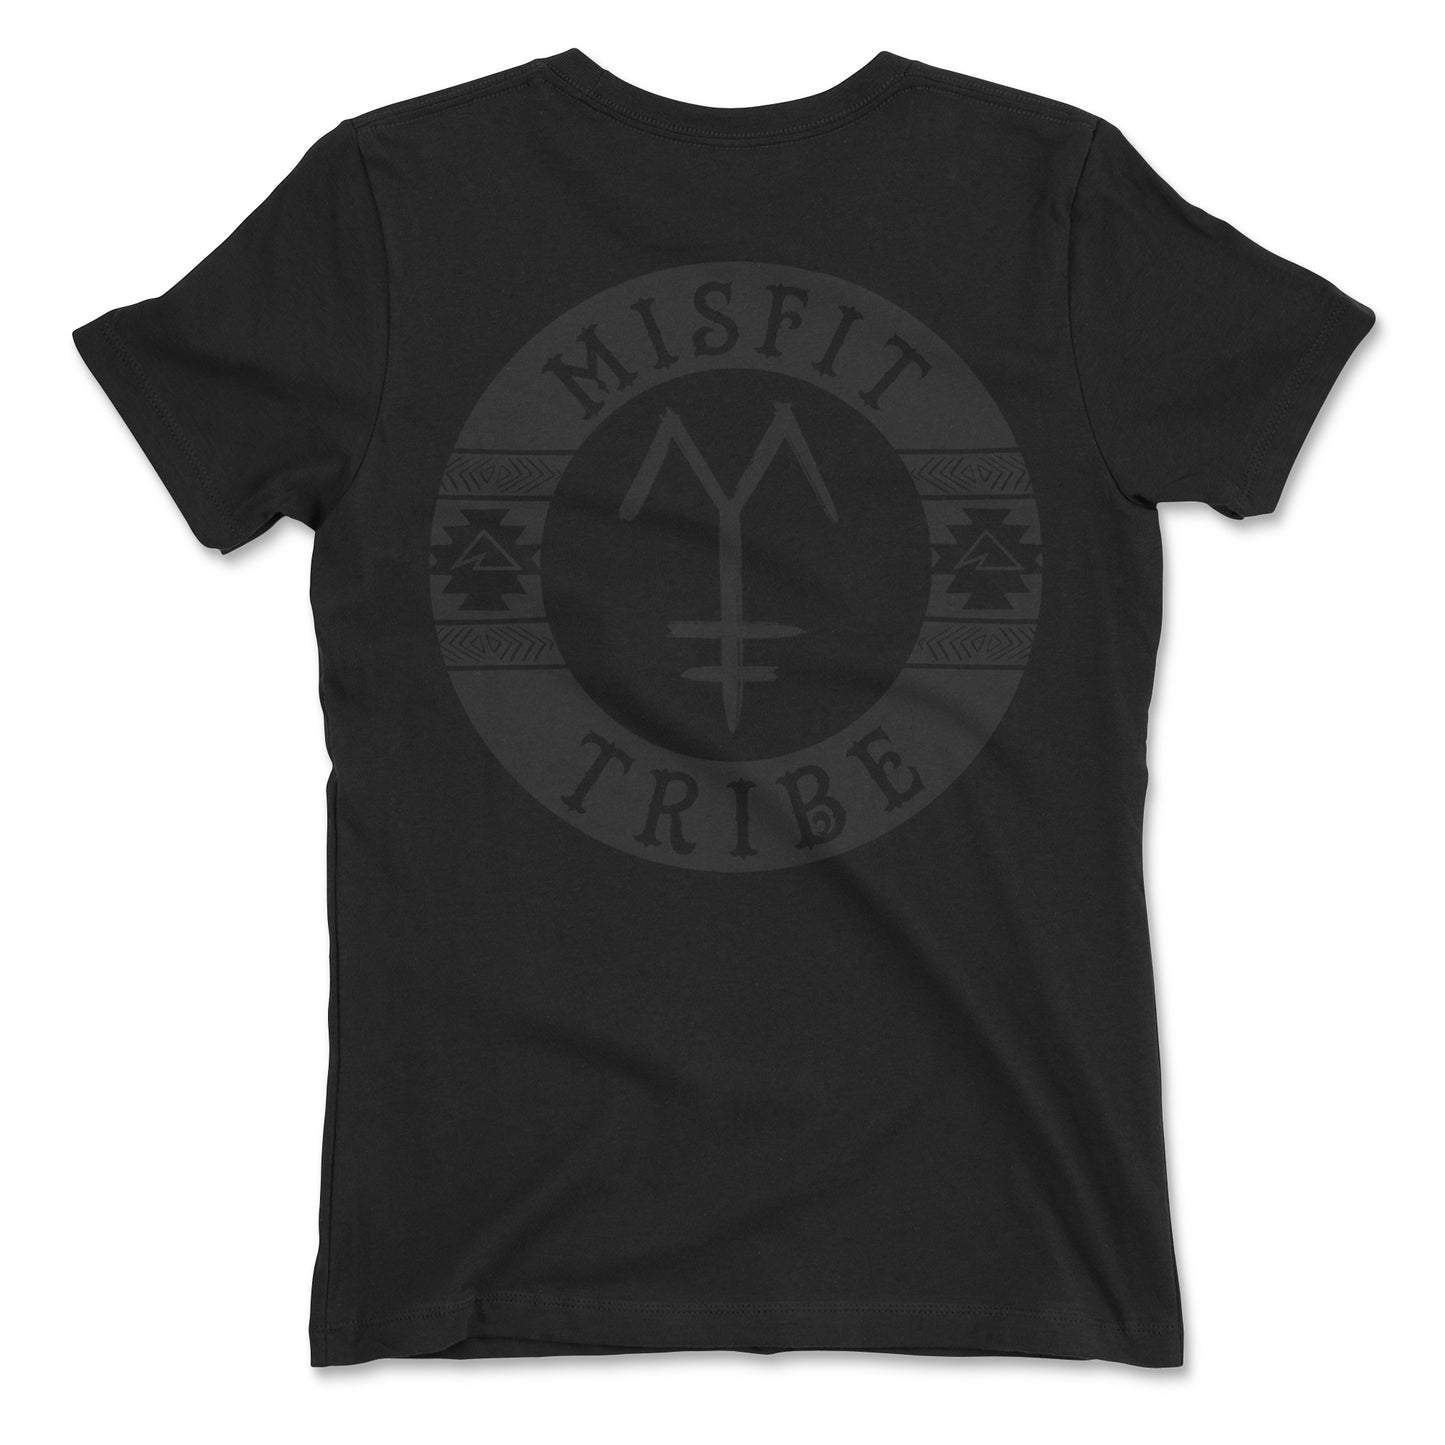 MISFIT TRIBE Tee - Midnight (FITTED)